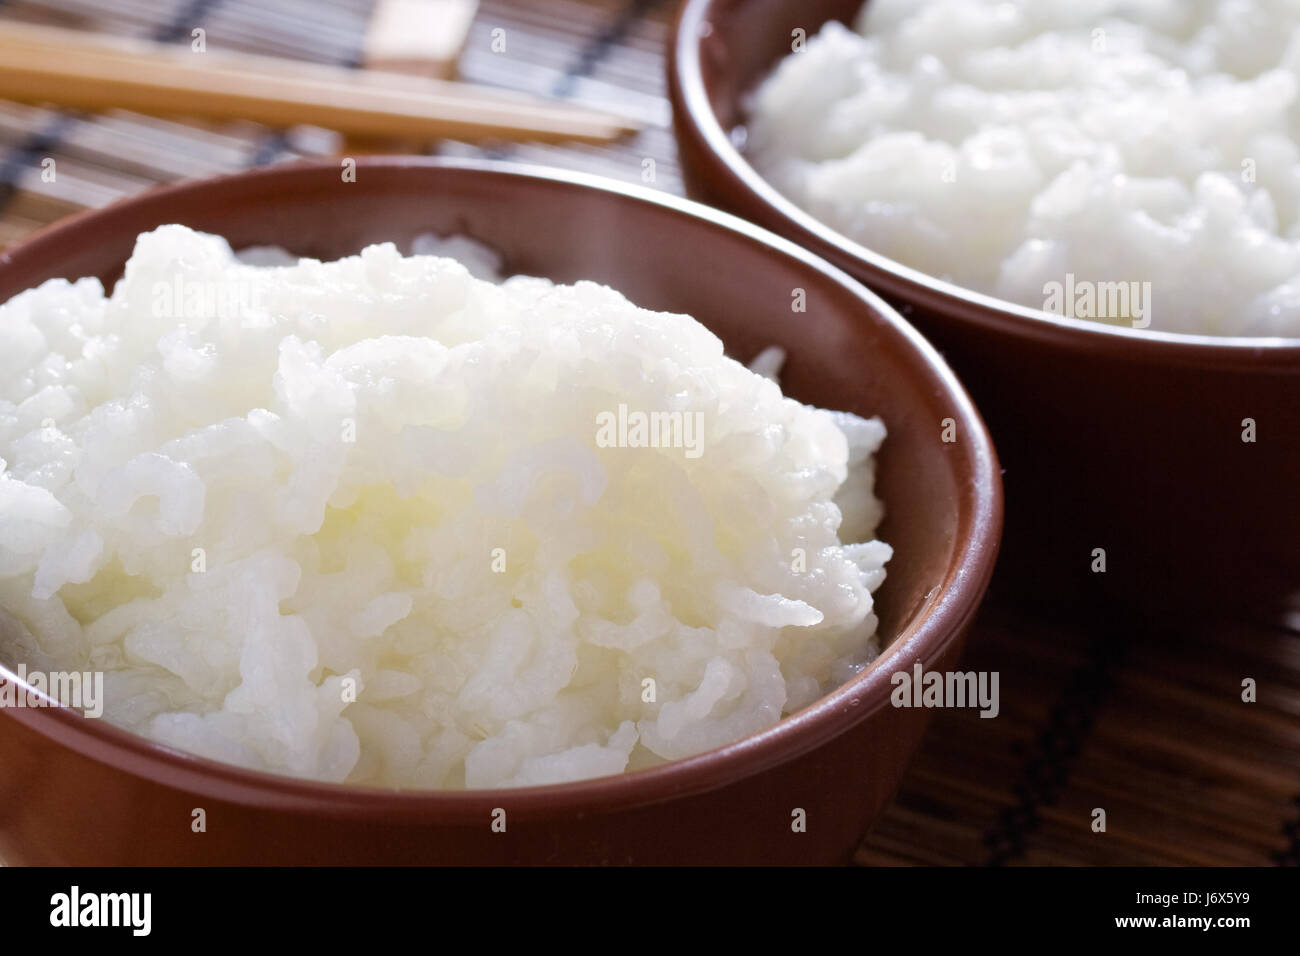 Rice steam or boil фото 91